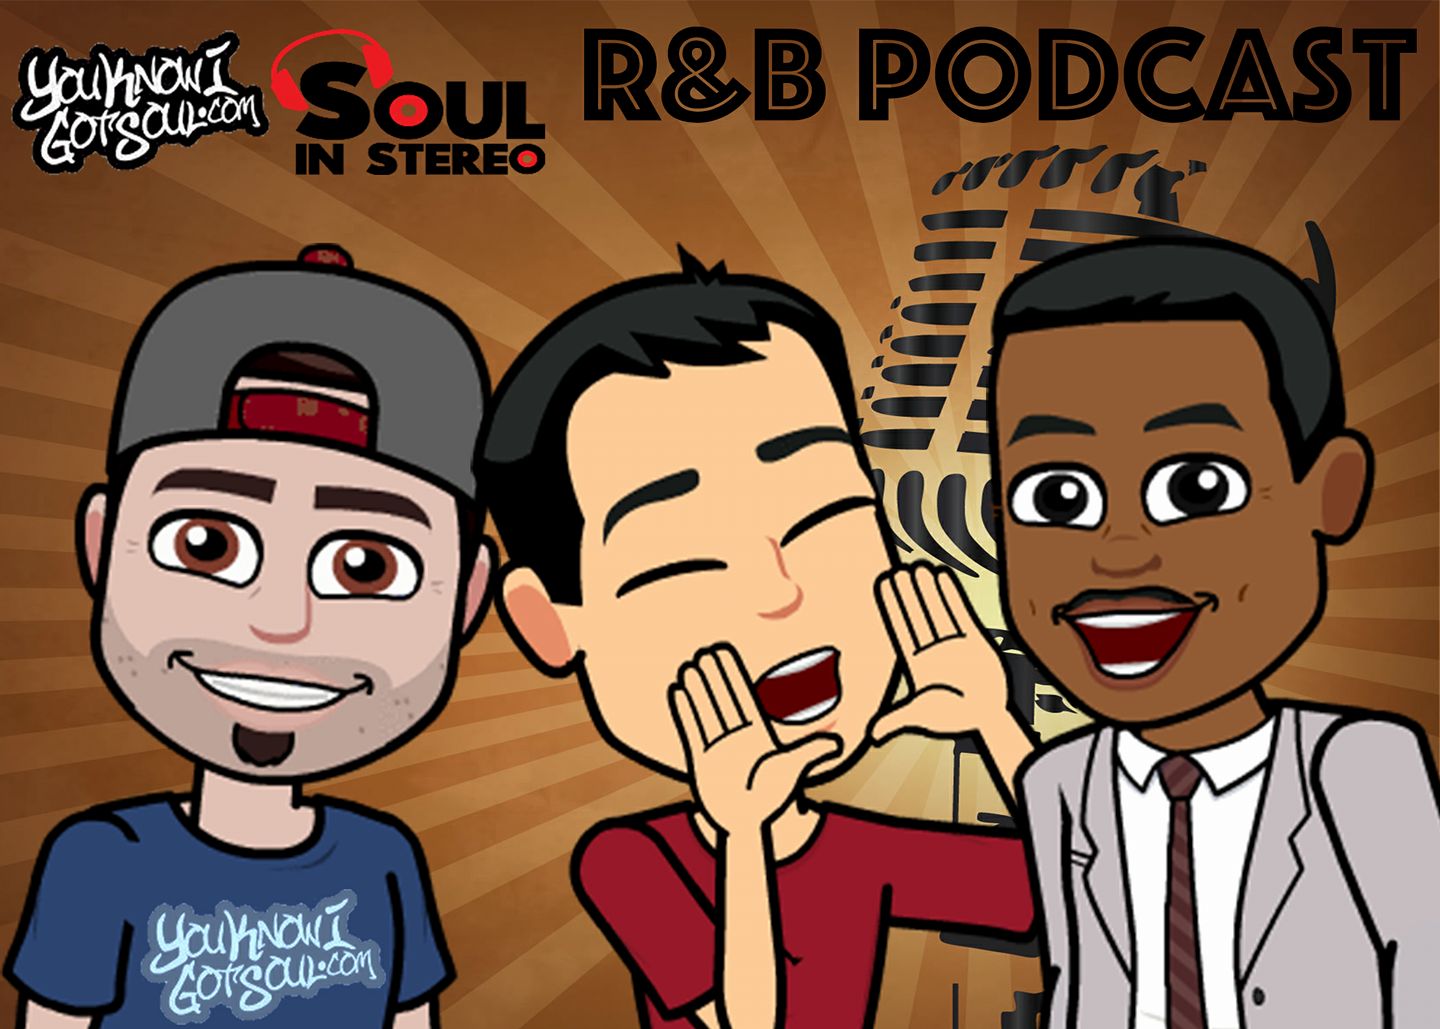 The Damage Caused By Urban Radio Blocking Out Love Songs  – YouKnowIGotSoul R&B Podcast Episode #64